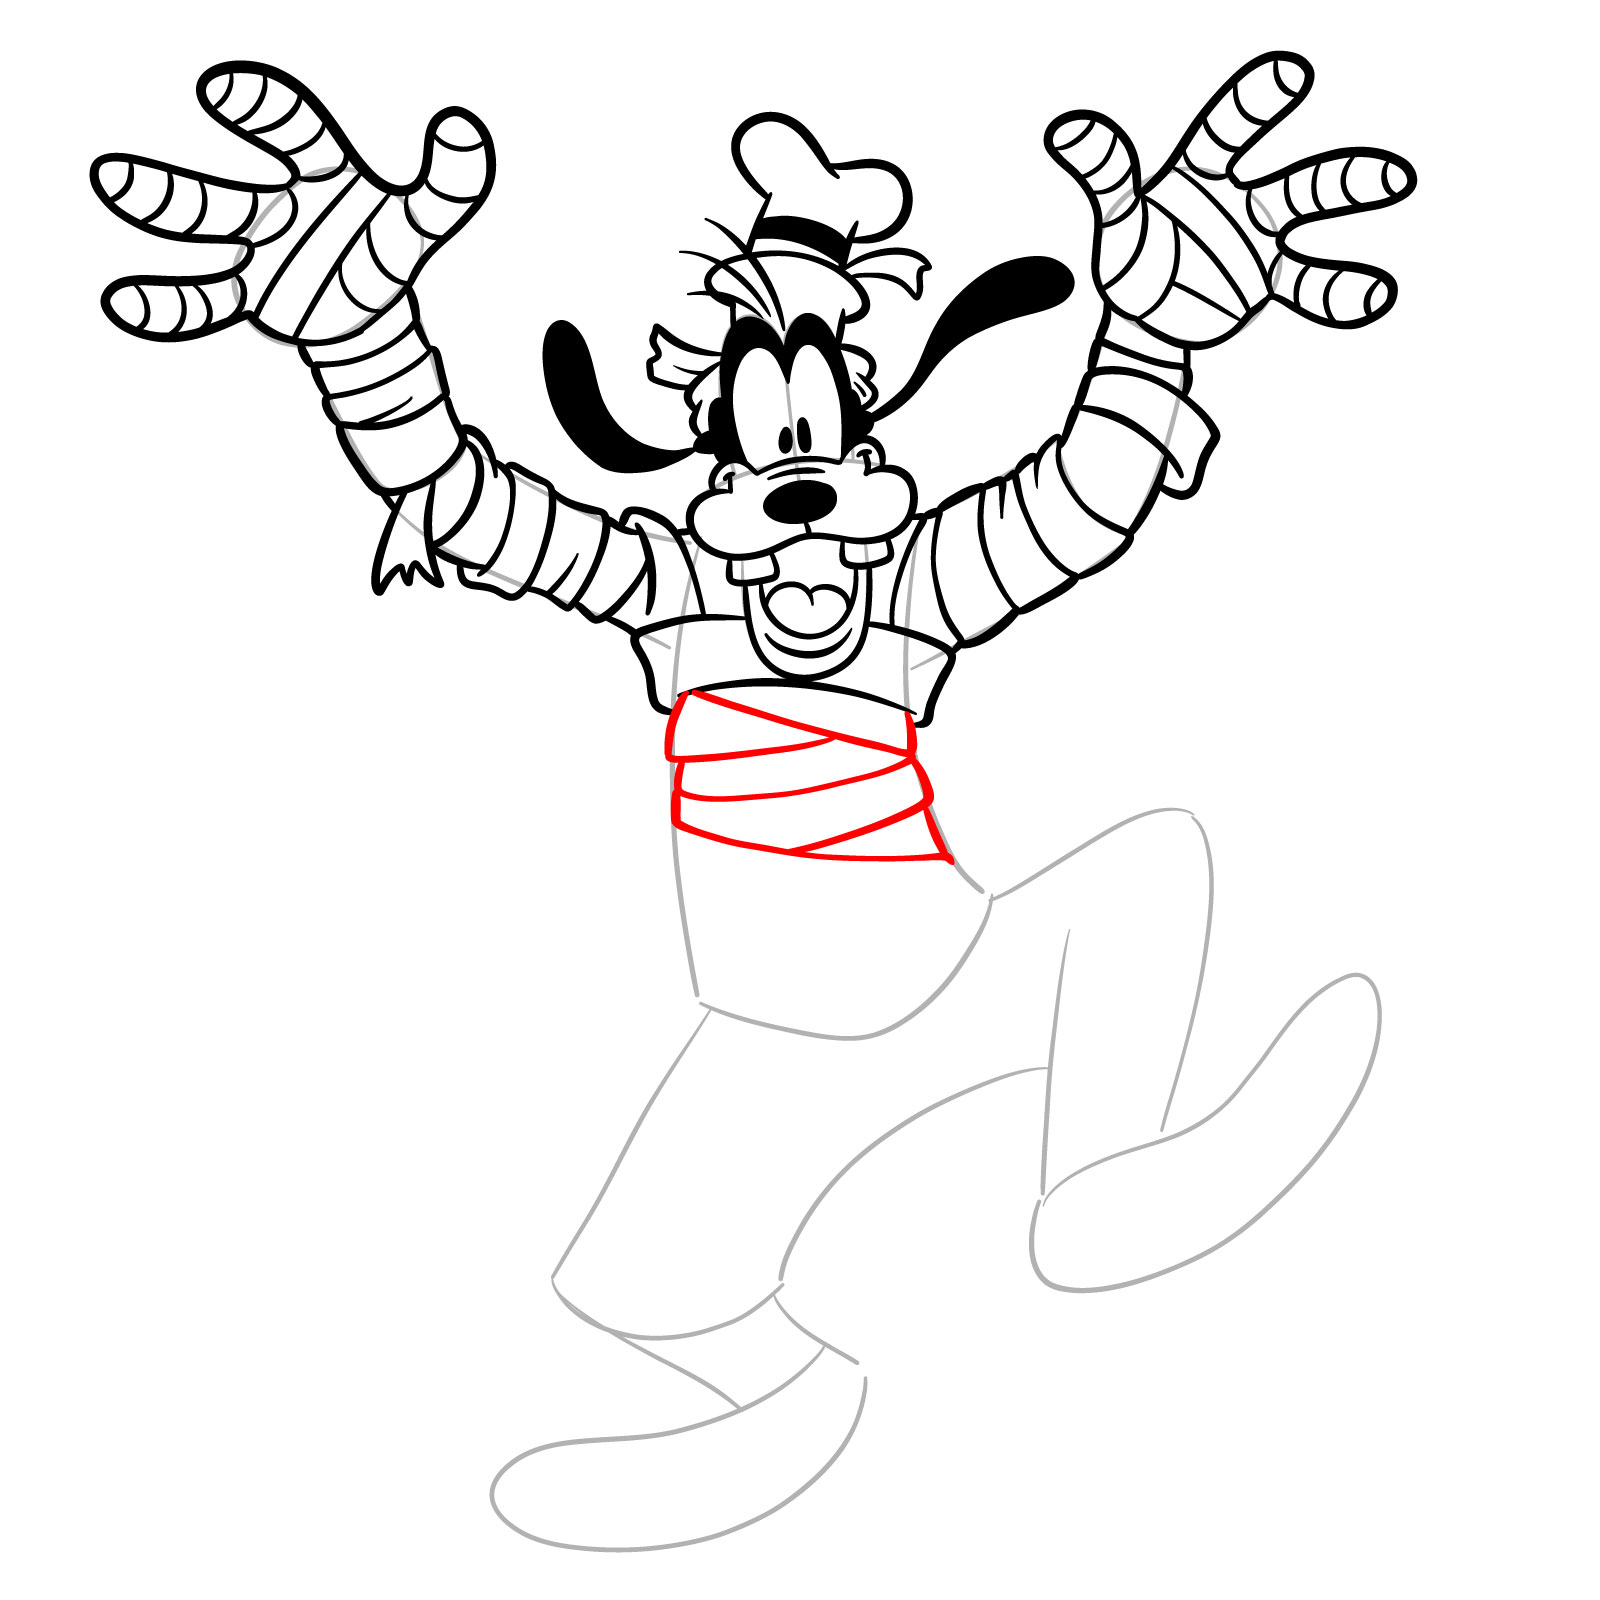 How to draw Halloween Goofy as a mummy - step 22